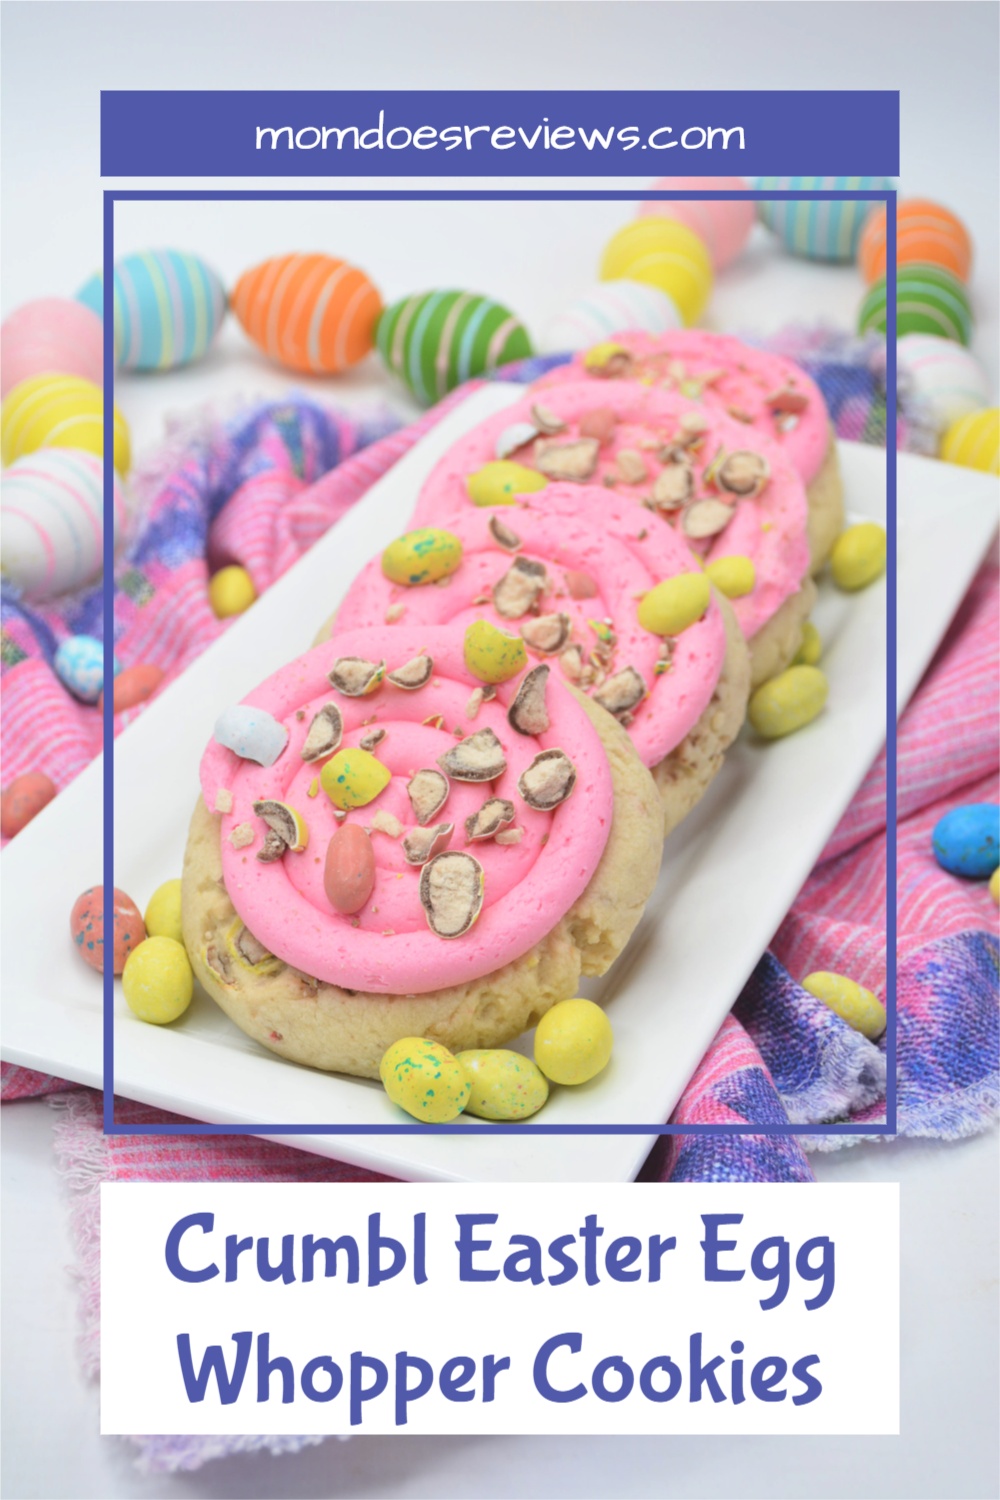 Crumbl Easter Egg Whopper Cookies 